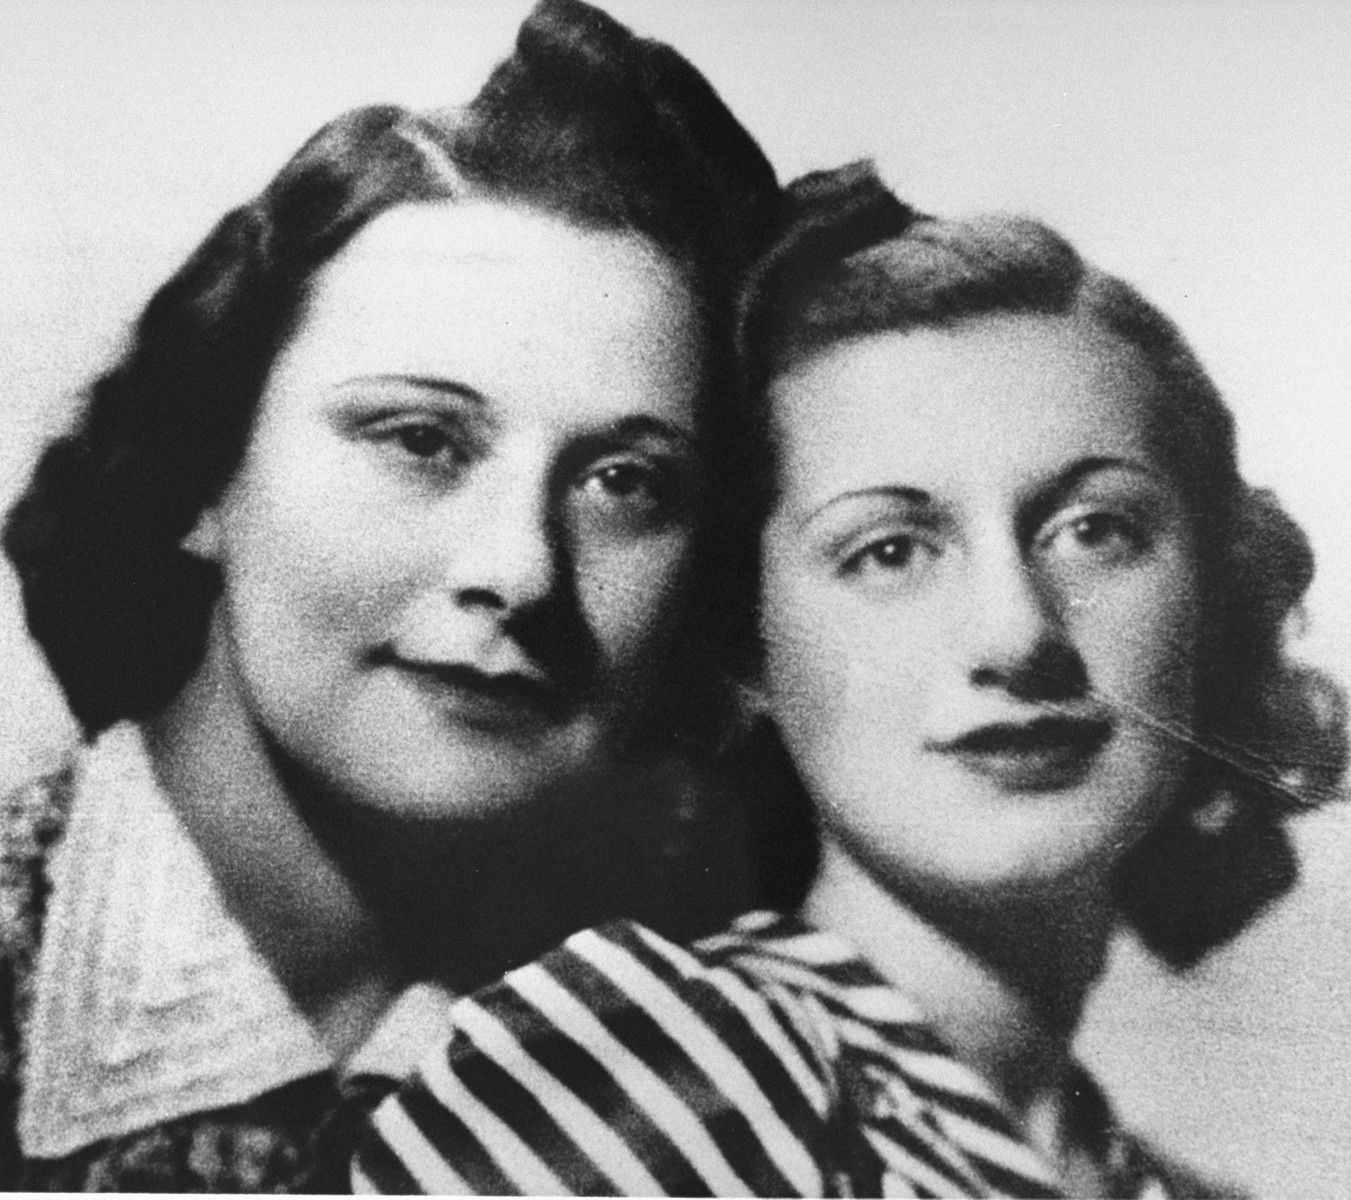 Portrait of the Gondas, Hungarian Jewish mother and daughter, who were  friends of the Veres family. 
In 1944 the Gondas were pulled out from a transport of Jews, who were to be sent on a death march to the Austrian border, by Tom Veres (with the help of Raoul Wallenberg).  Though they lacked Schutzpassen, the women were able to reach a safe house, where Veres photographed them for protective documents.  Neither, however, survived.